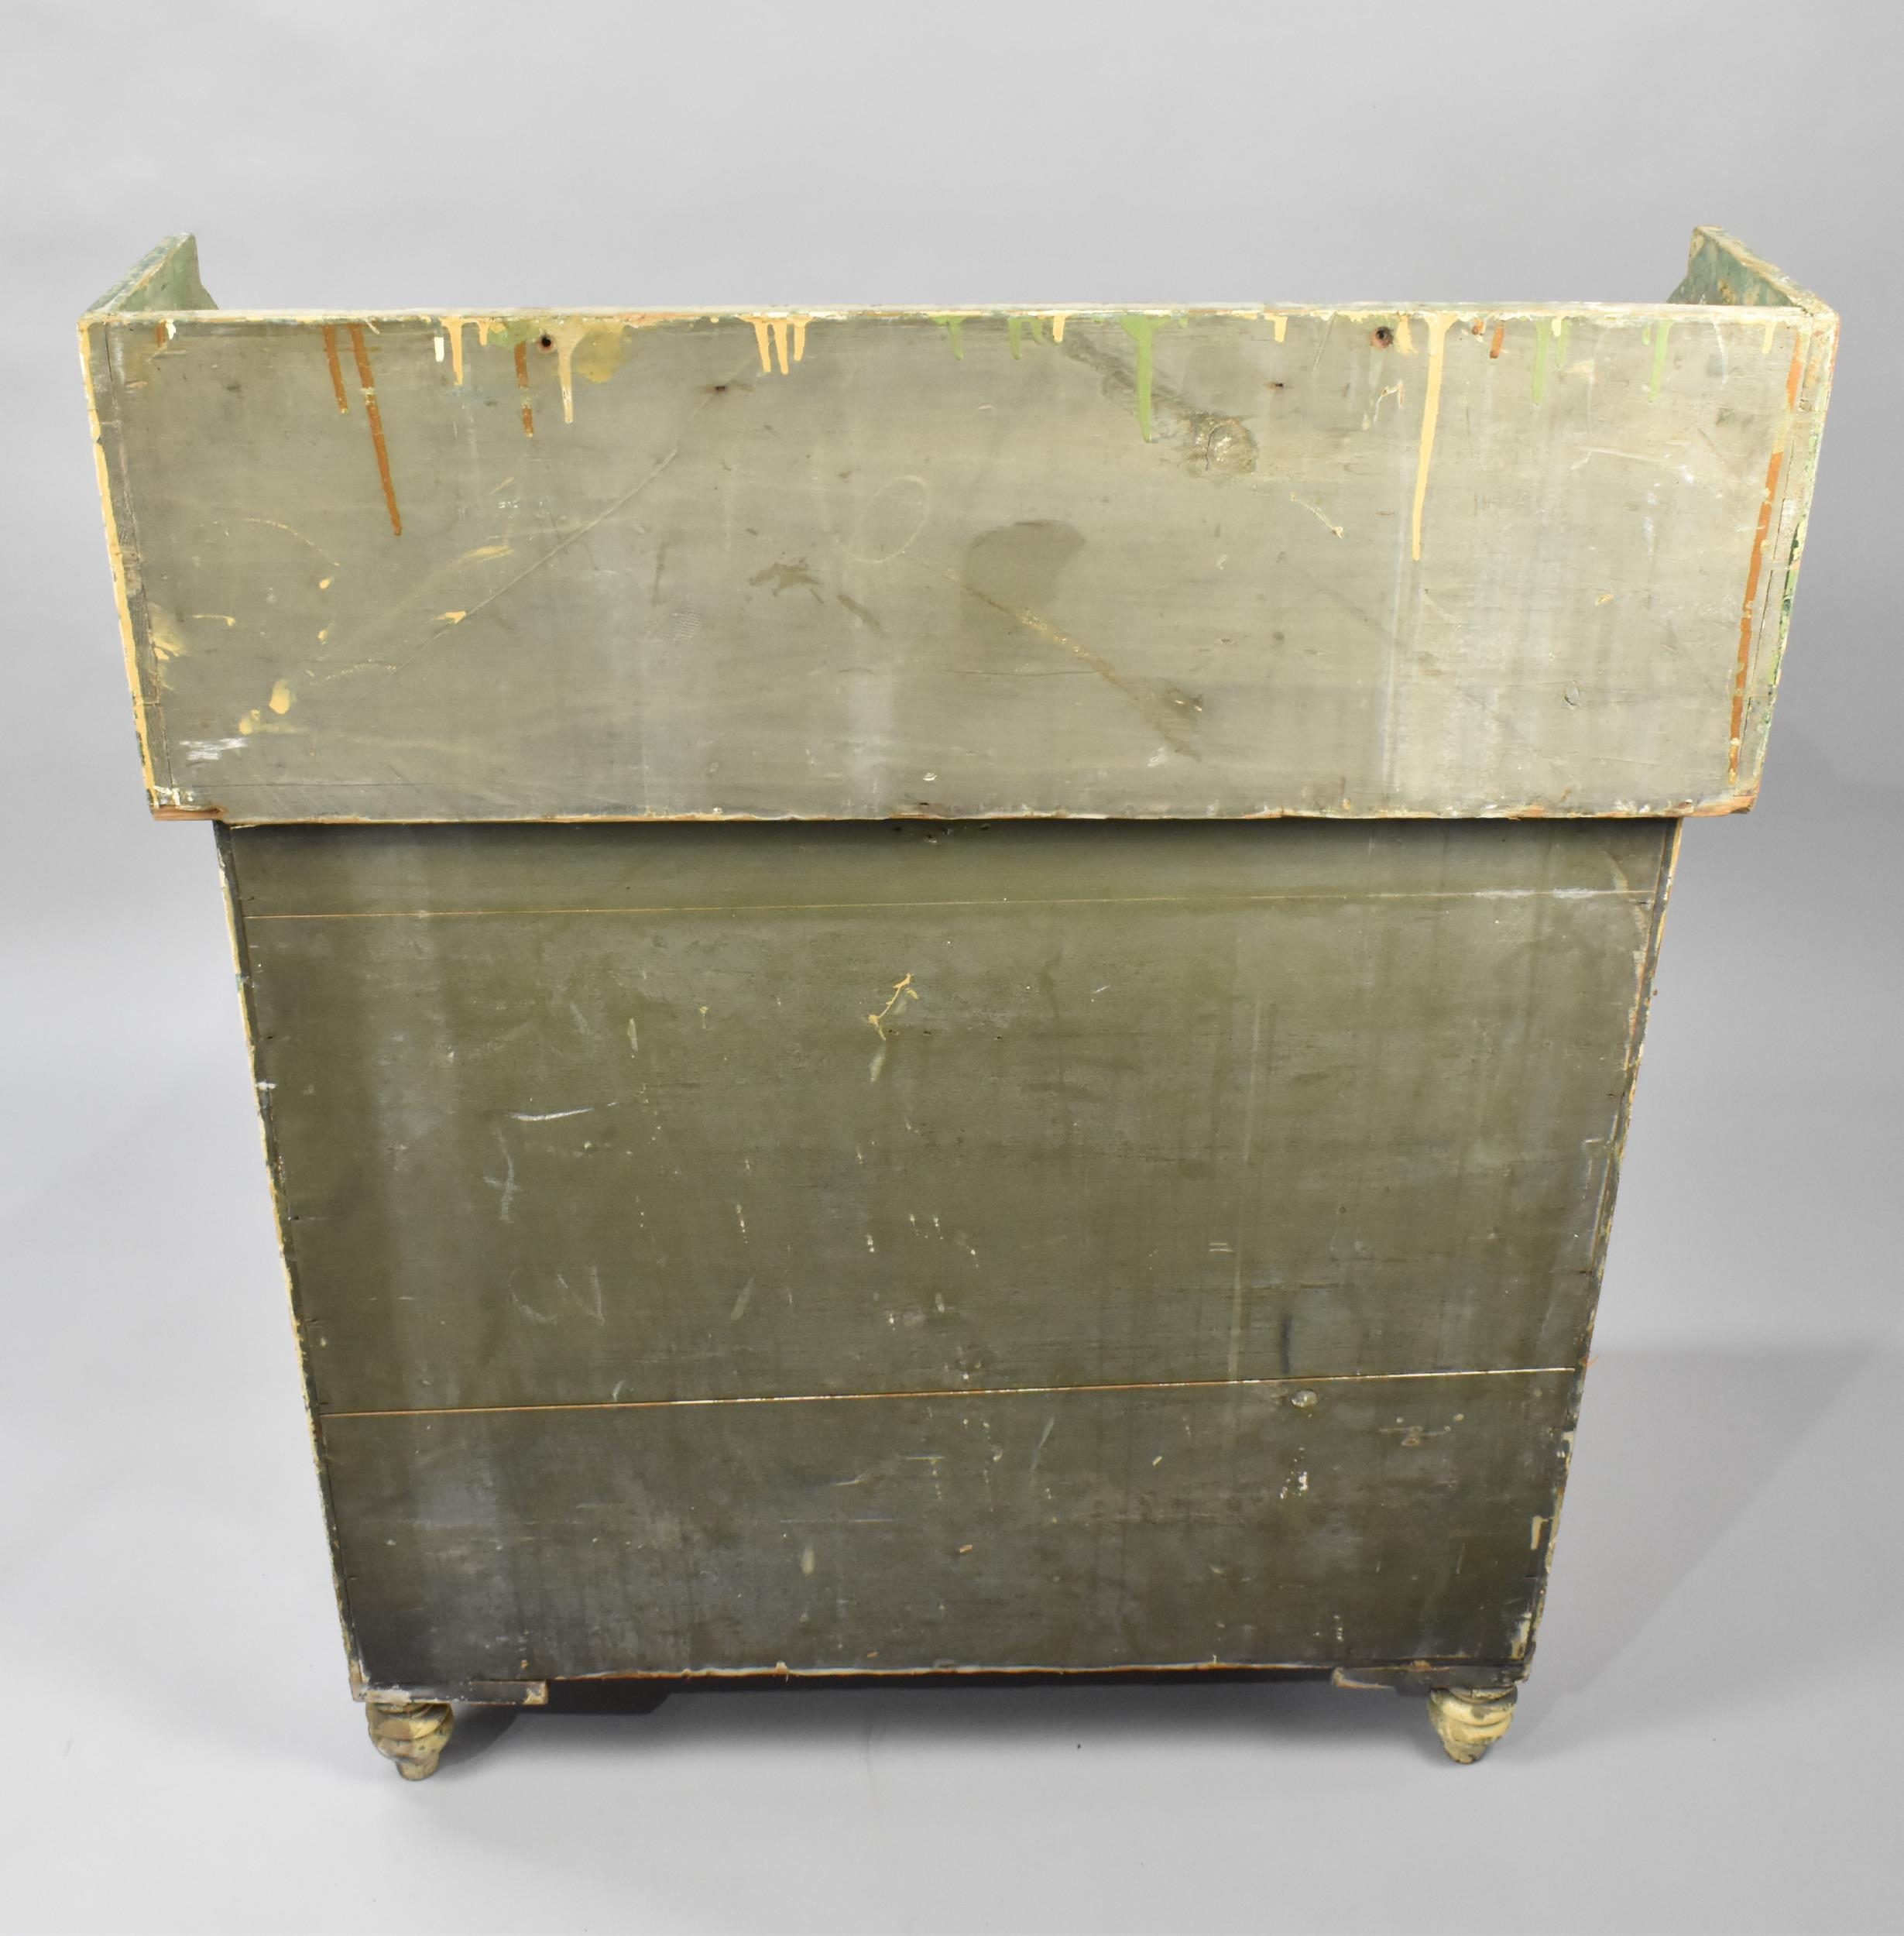 A 19th Century Painted Pine Washstand with Trompe L'oeil Decoration, Reverse Lining and Acanthus - Image 4 of 4